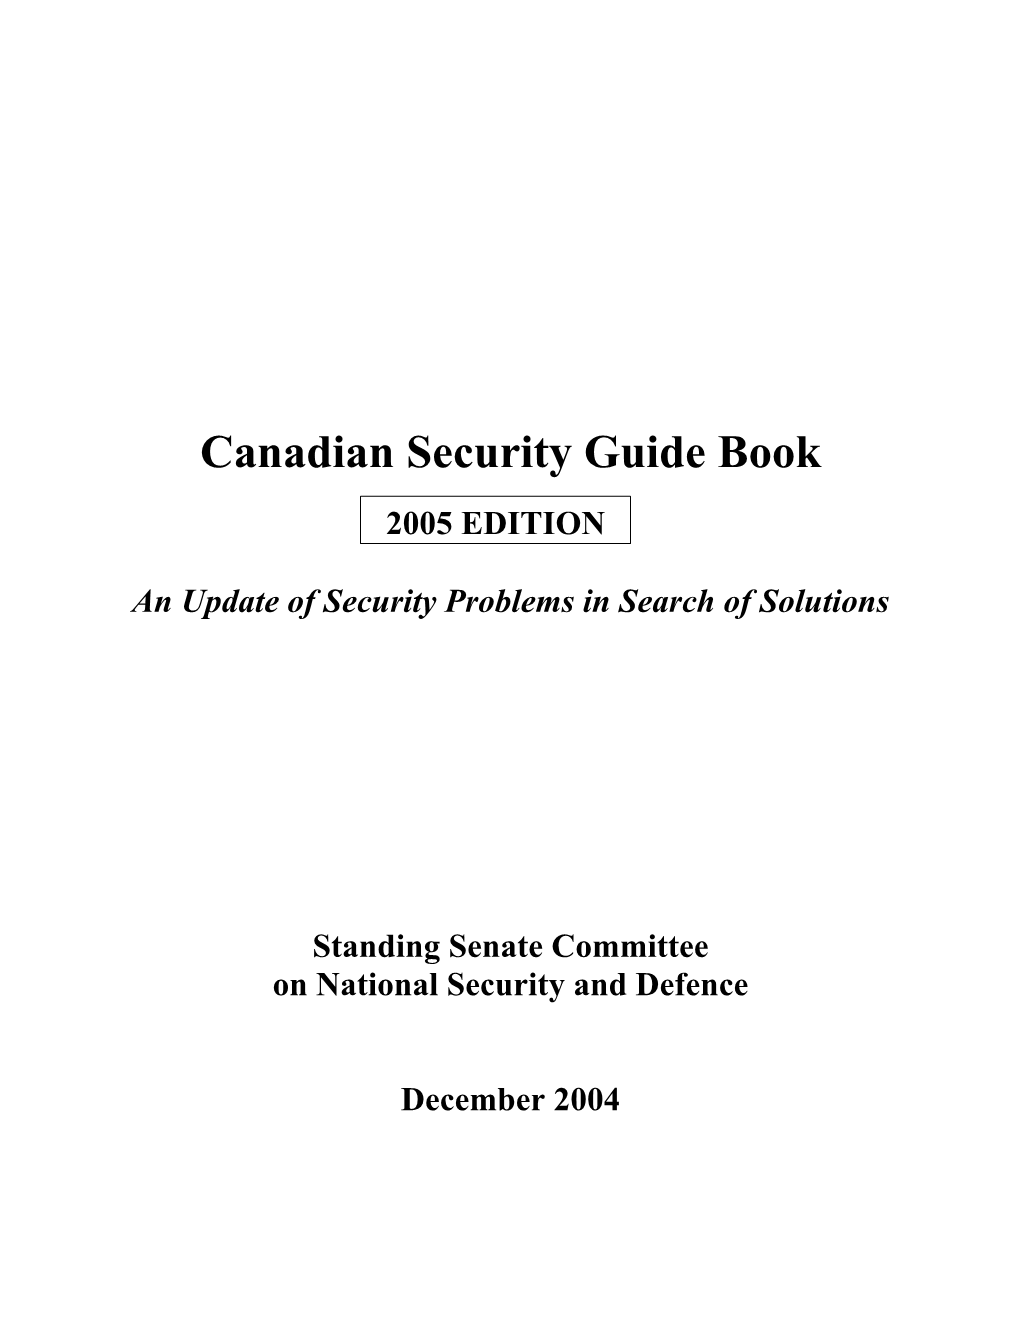 Canadian Security Guide Book, 2005 Edition